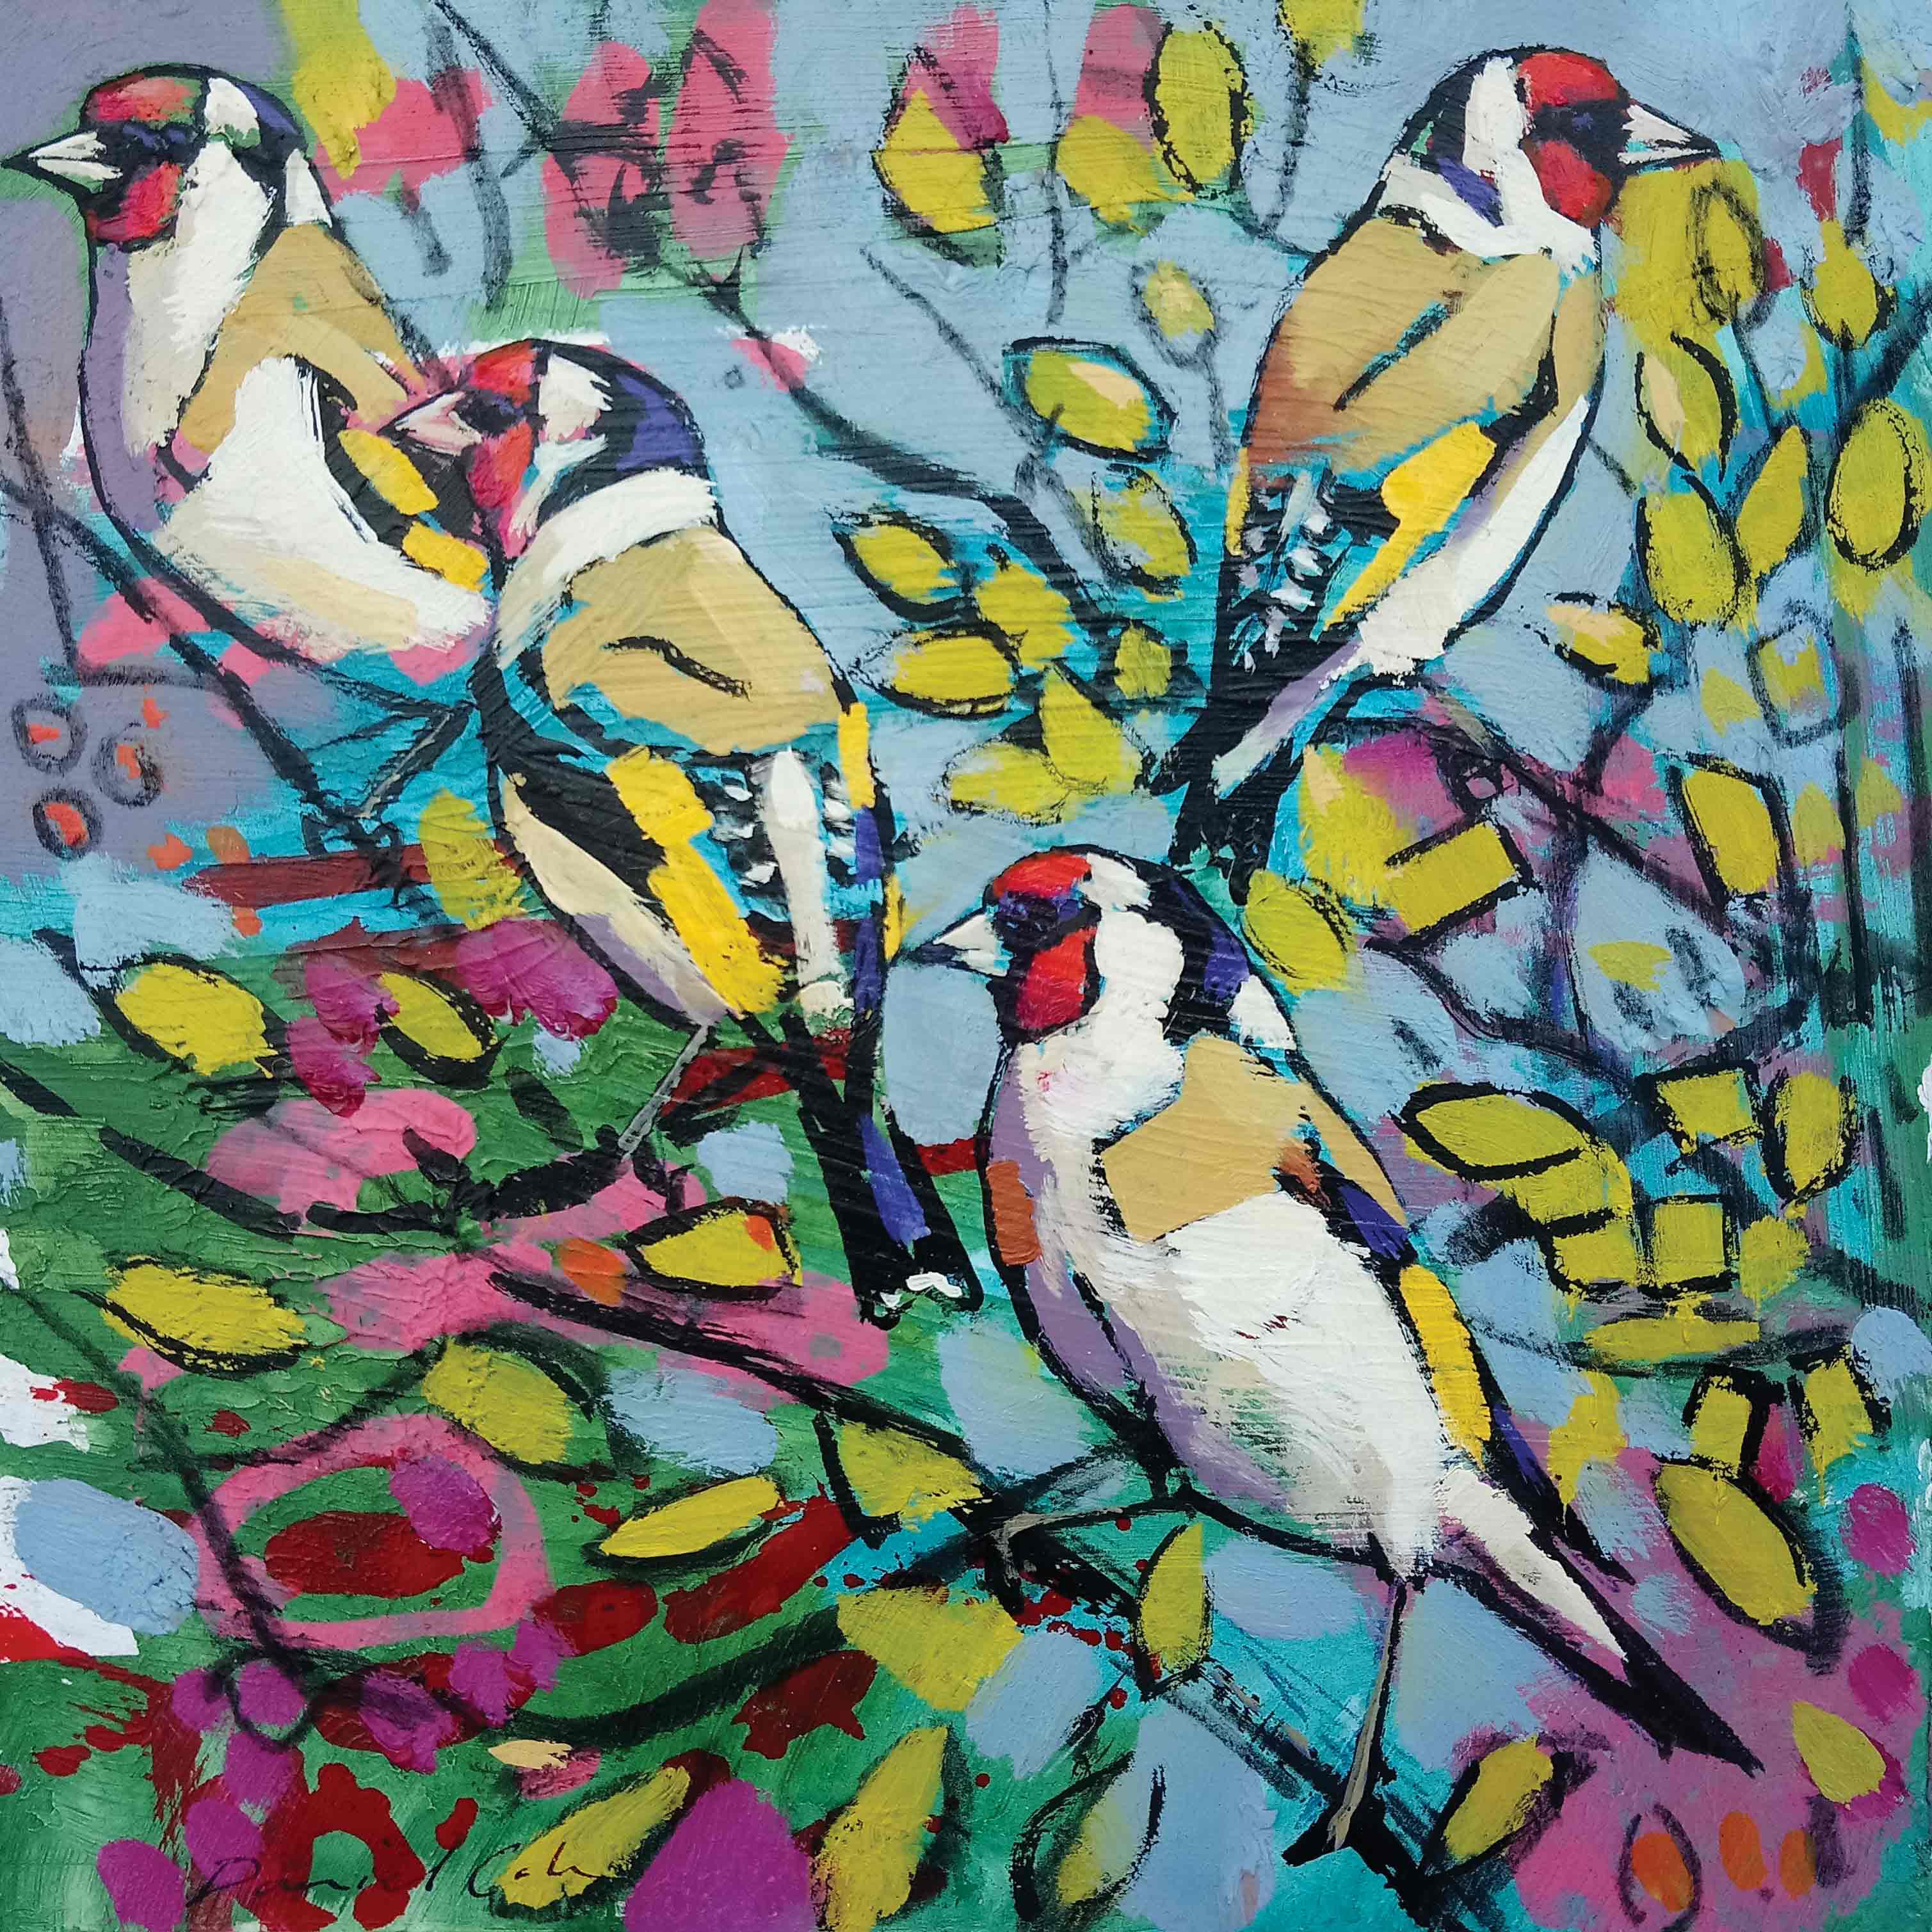 Fine Art Greeting Card by Daniel Cole, Oilpainting, Four Goldfinches in a tree